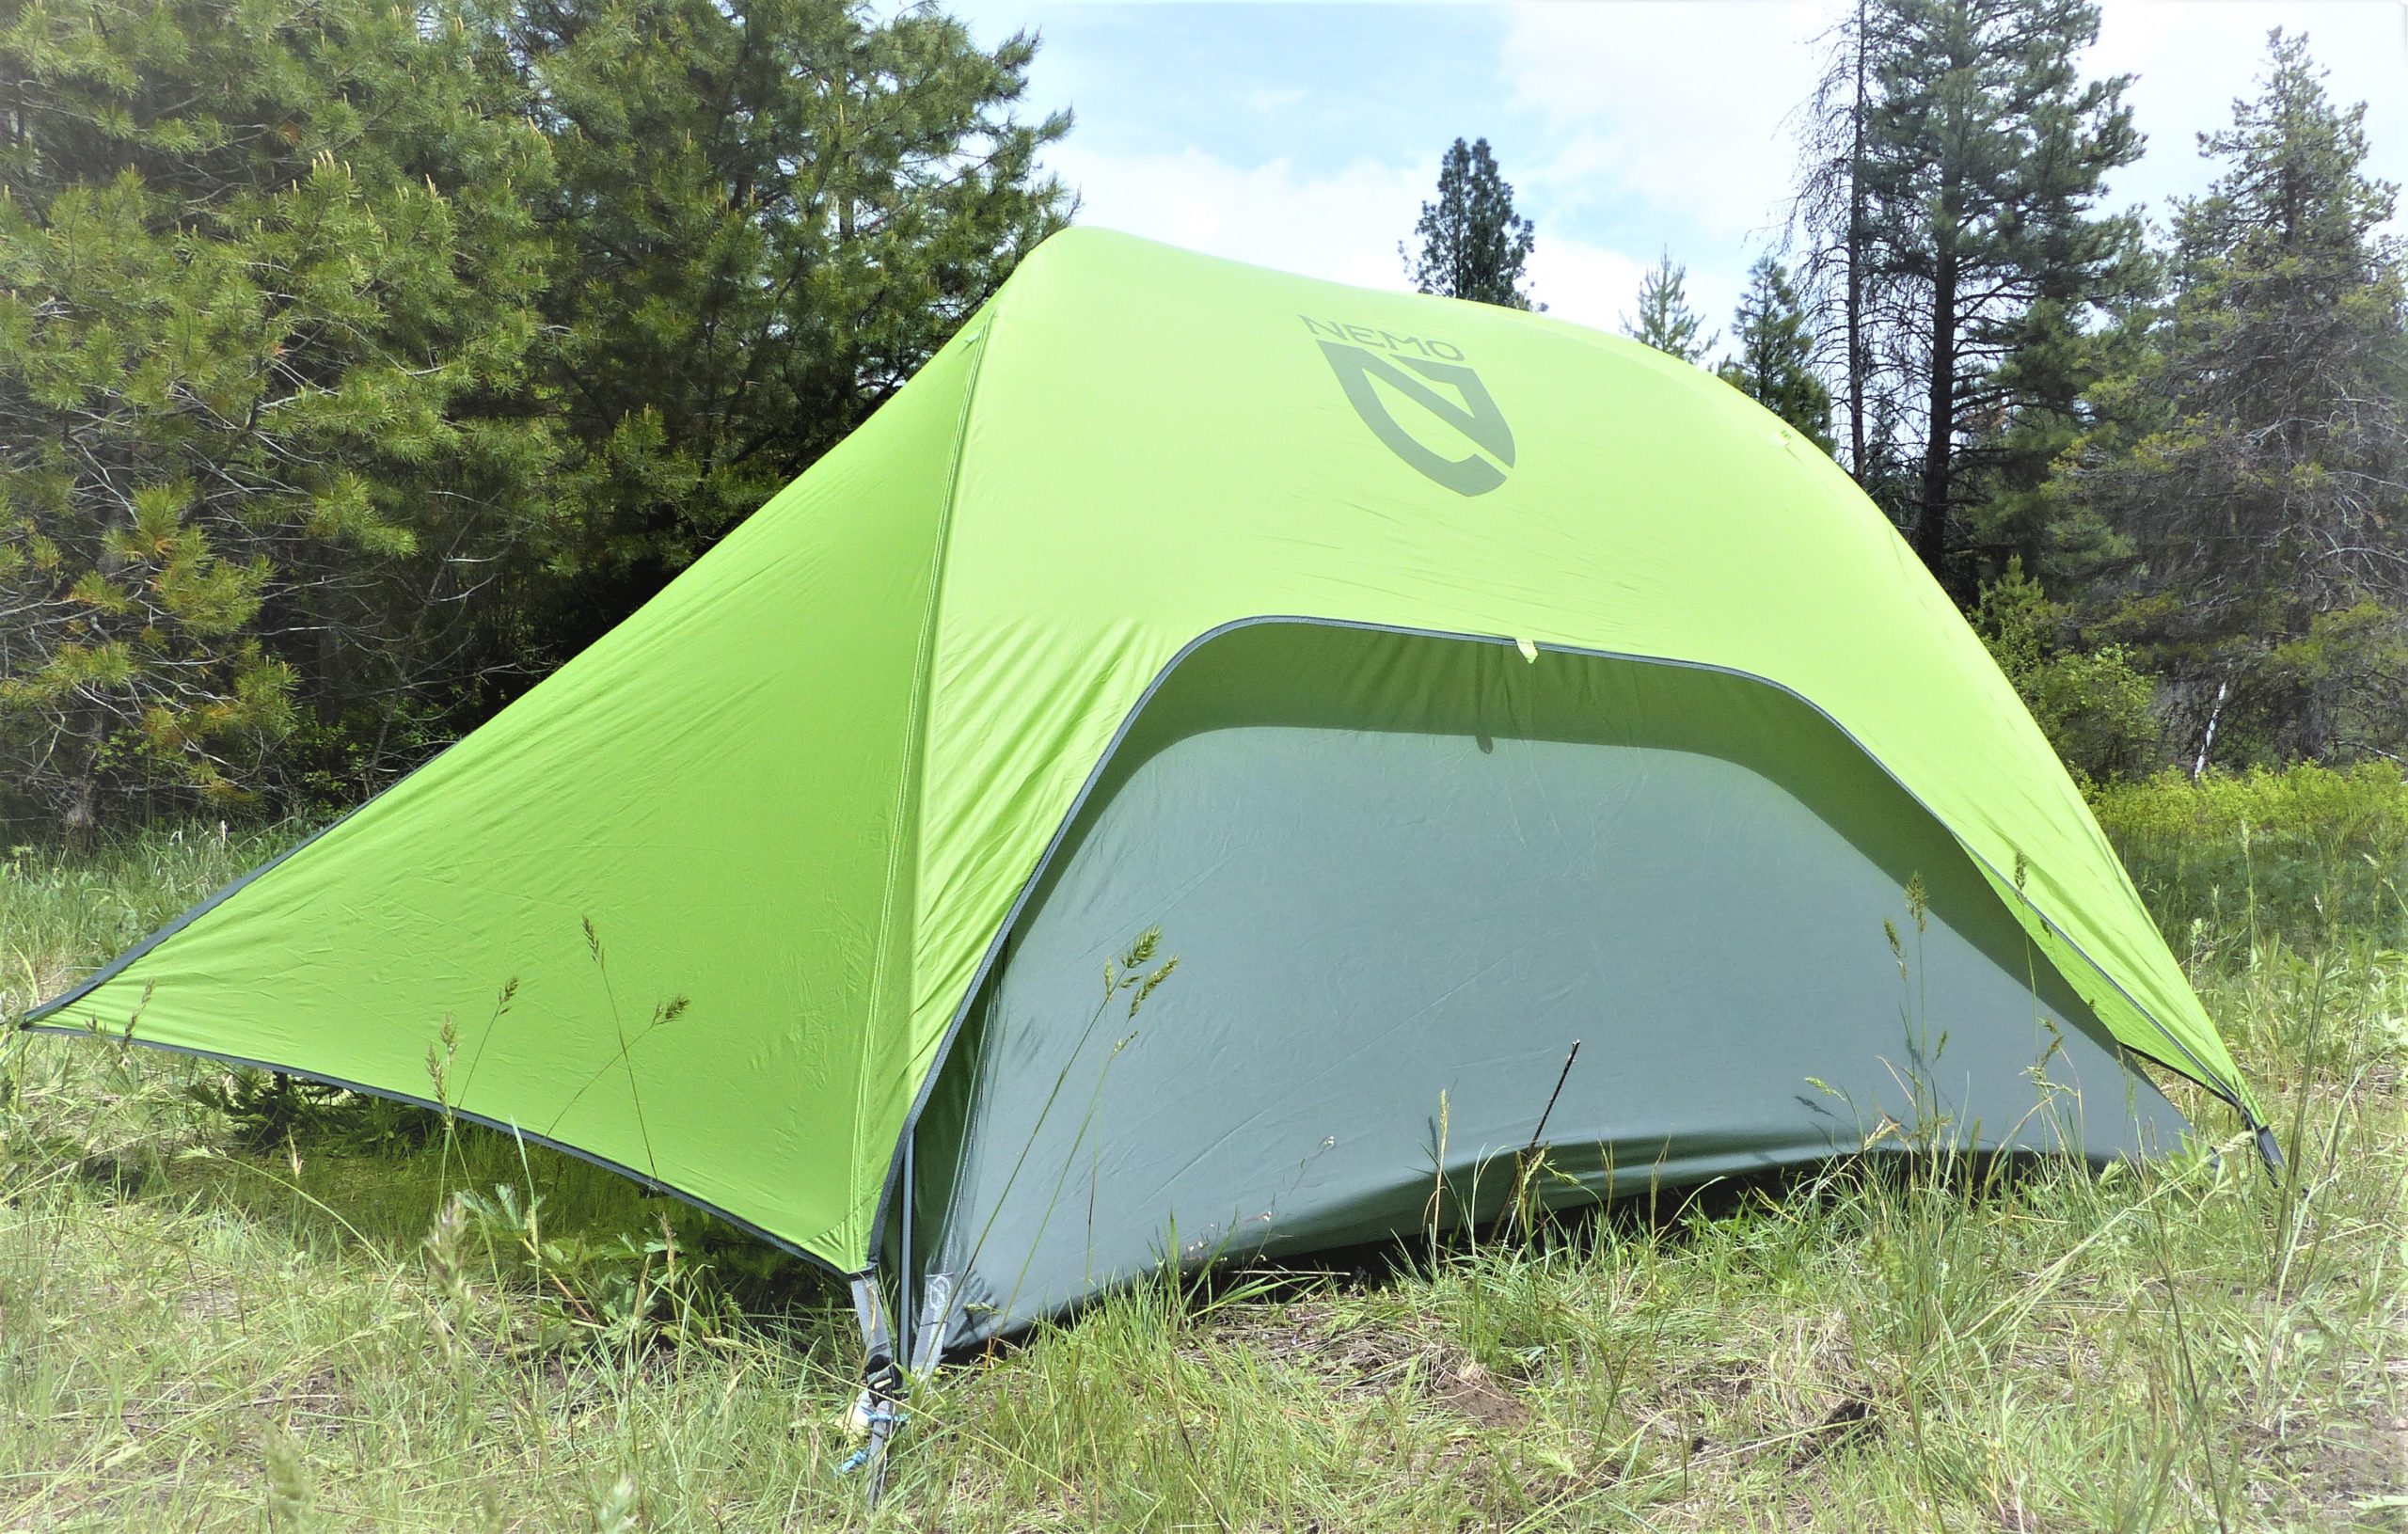 Best backpacking tents for hunting - Nemo Hornet 2p